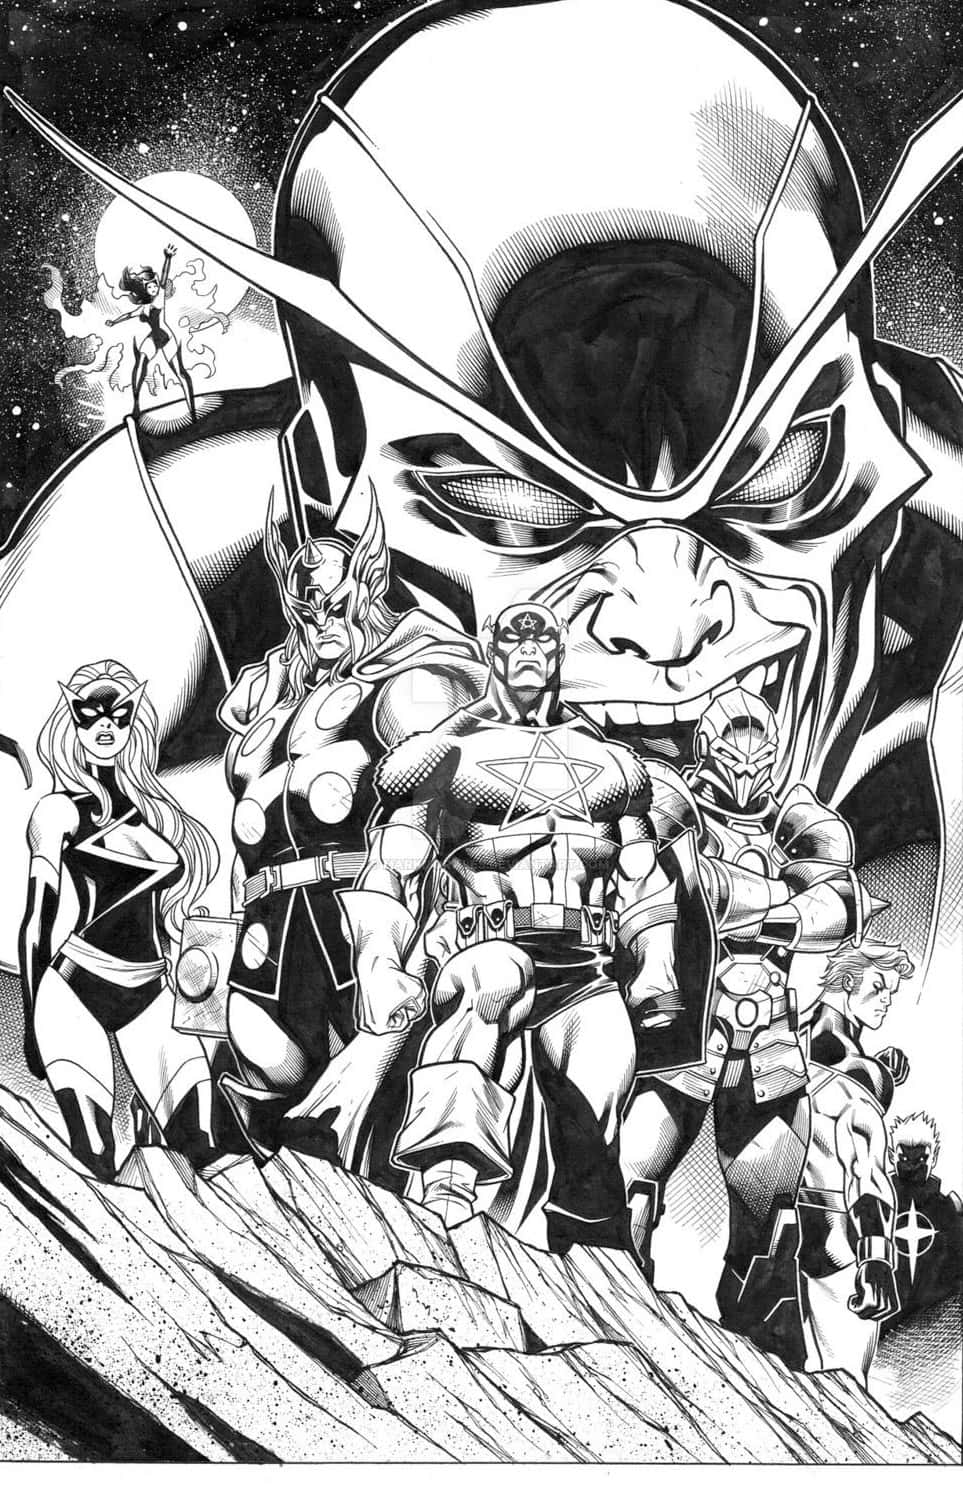 Black and White Comic Art featuring Superheroes Wallpaper